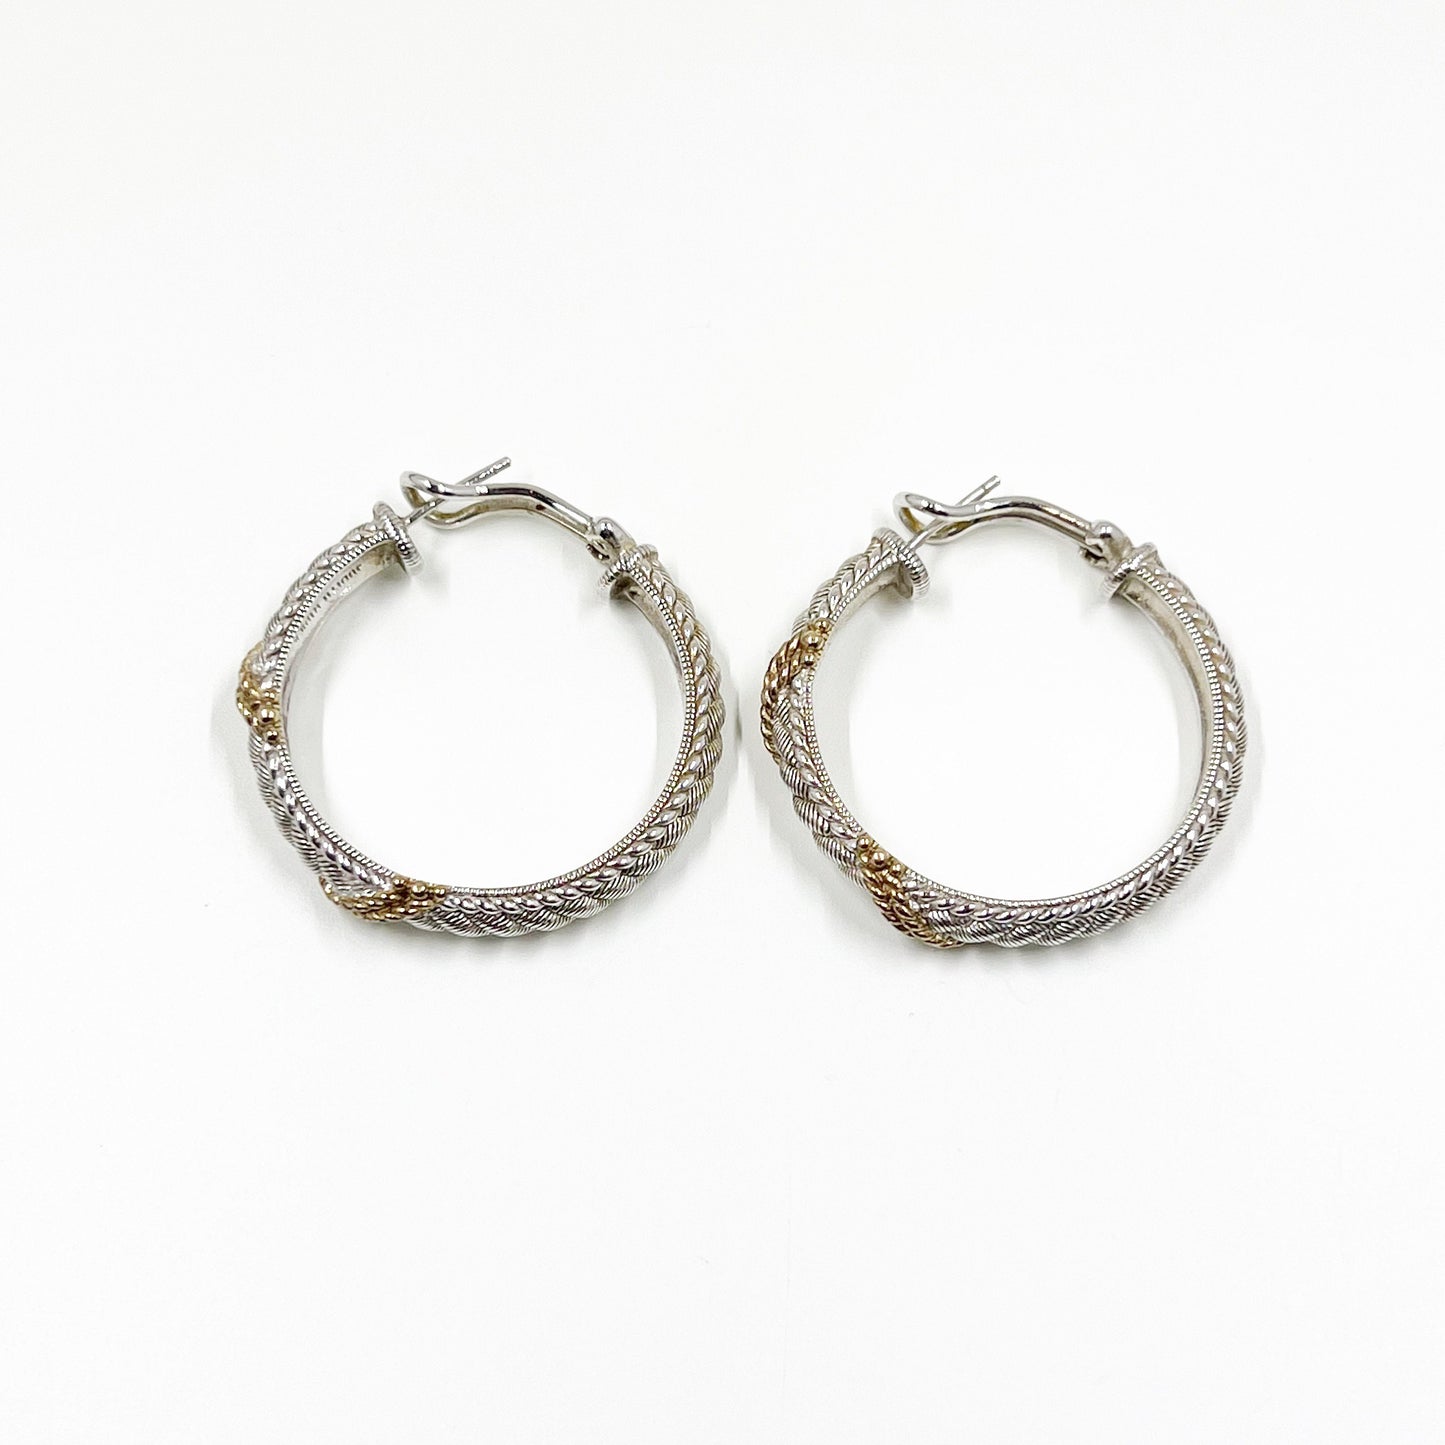 Estate Judith Ripka Two Tone Silver Braided Rope Hoop Earrings| Judith Ripka Silver and Gold Omega Hoop Earrings | Large Hoop Earrings